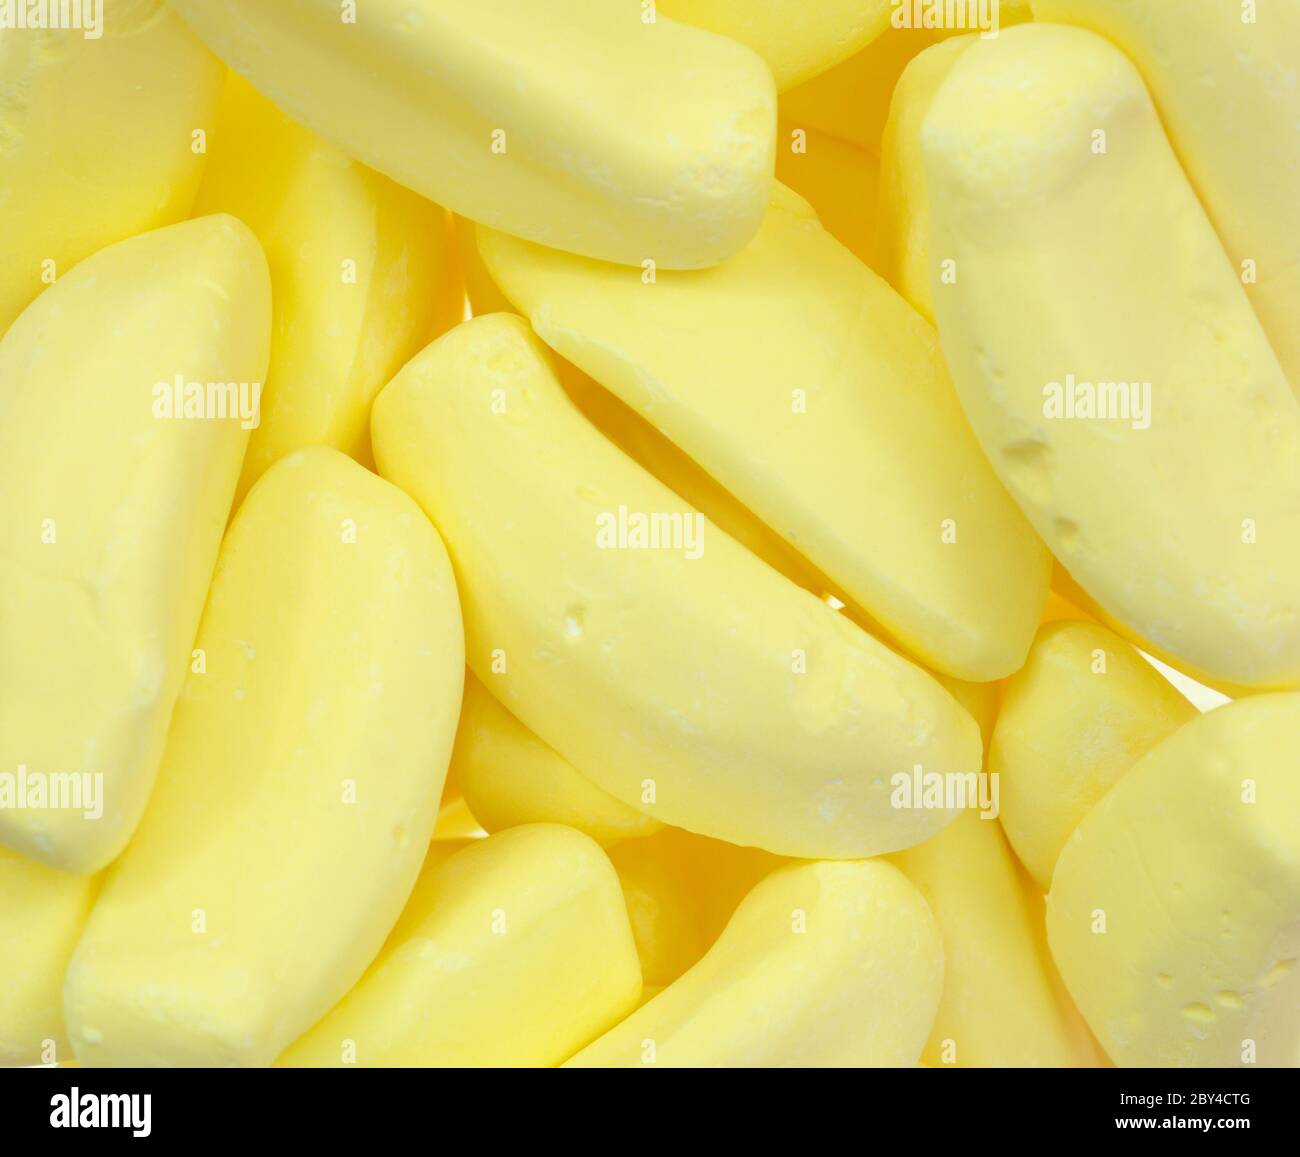 Candy bananas isolated against a white background Stock Photo